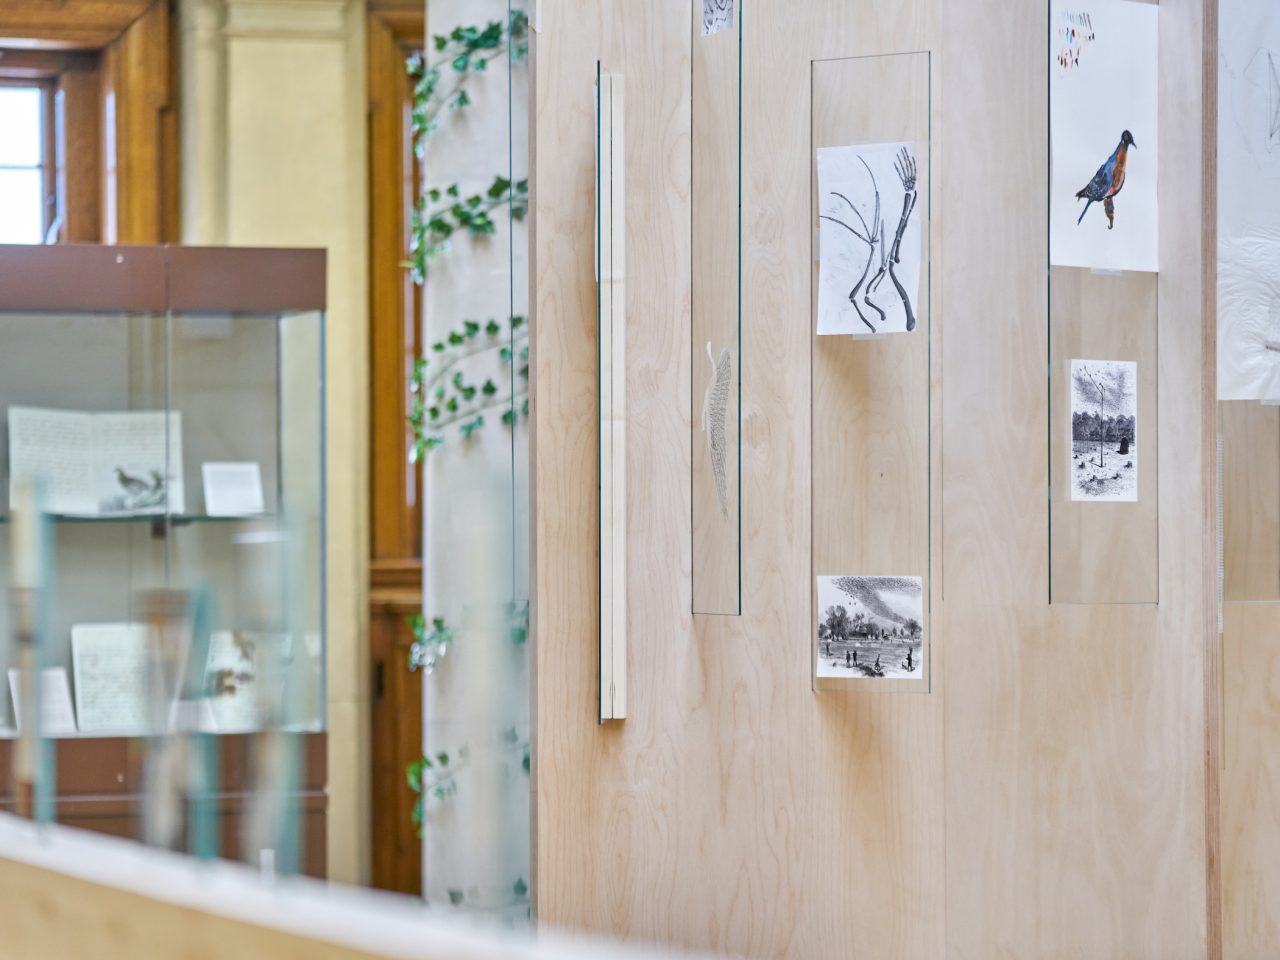 Illustrations presented in mounted glass, the illustrations show birds and their anatomy.